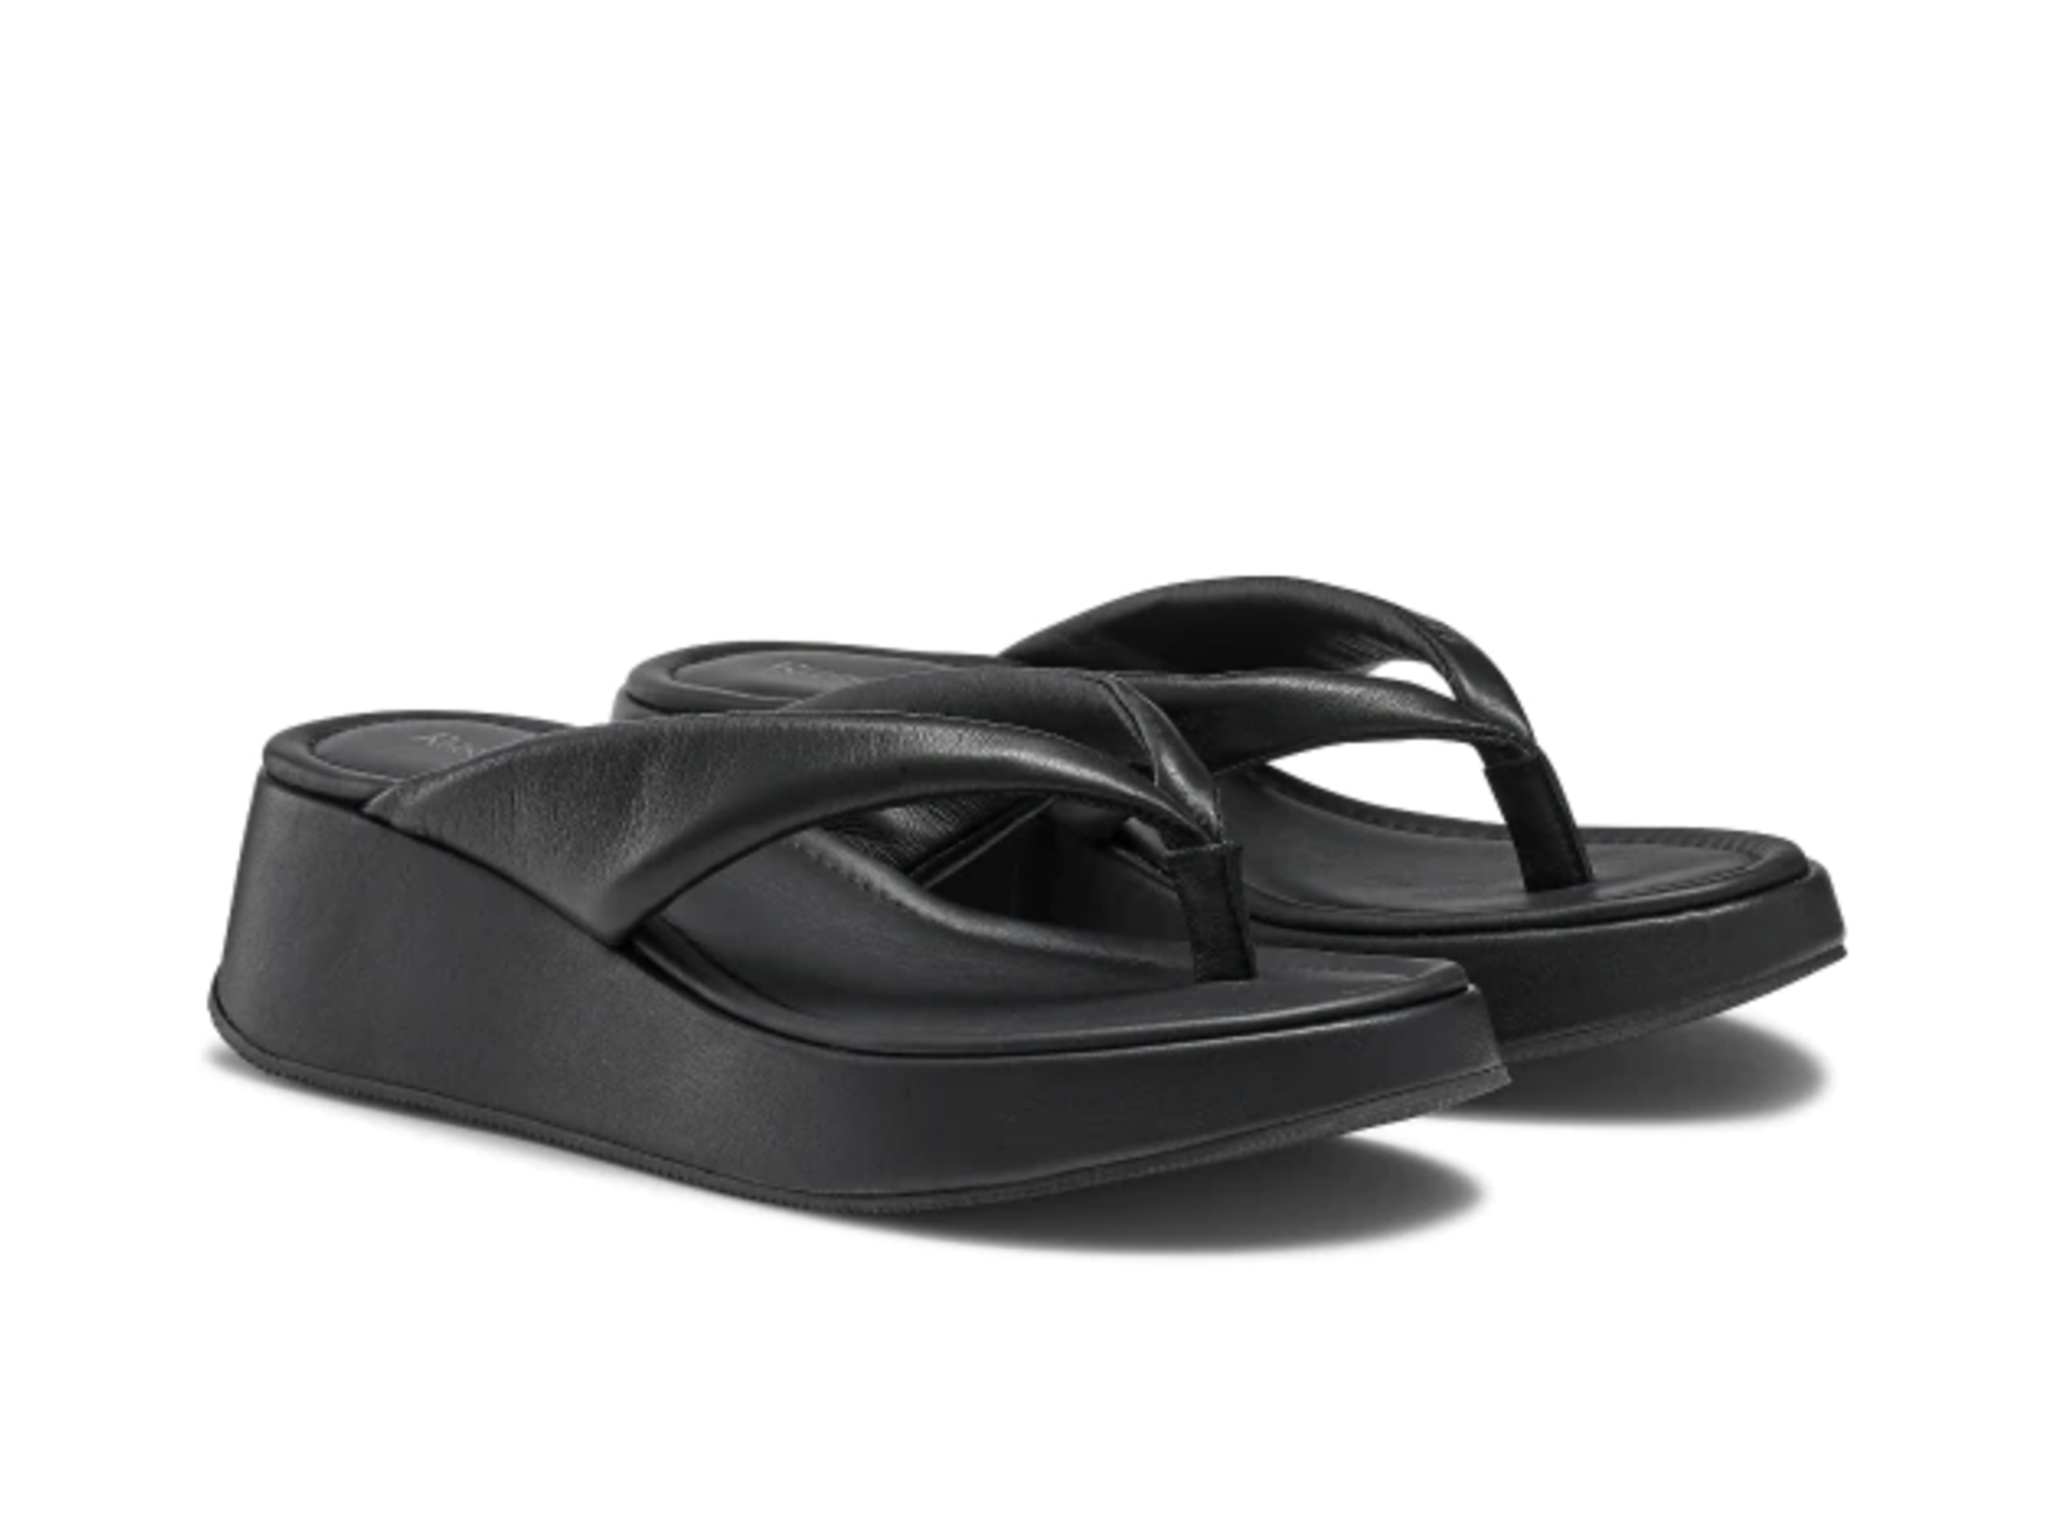 russell-and-bromley-indybest-flip-flop-90s